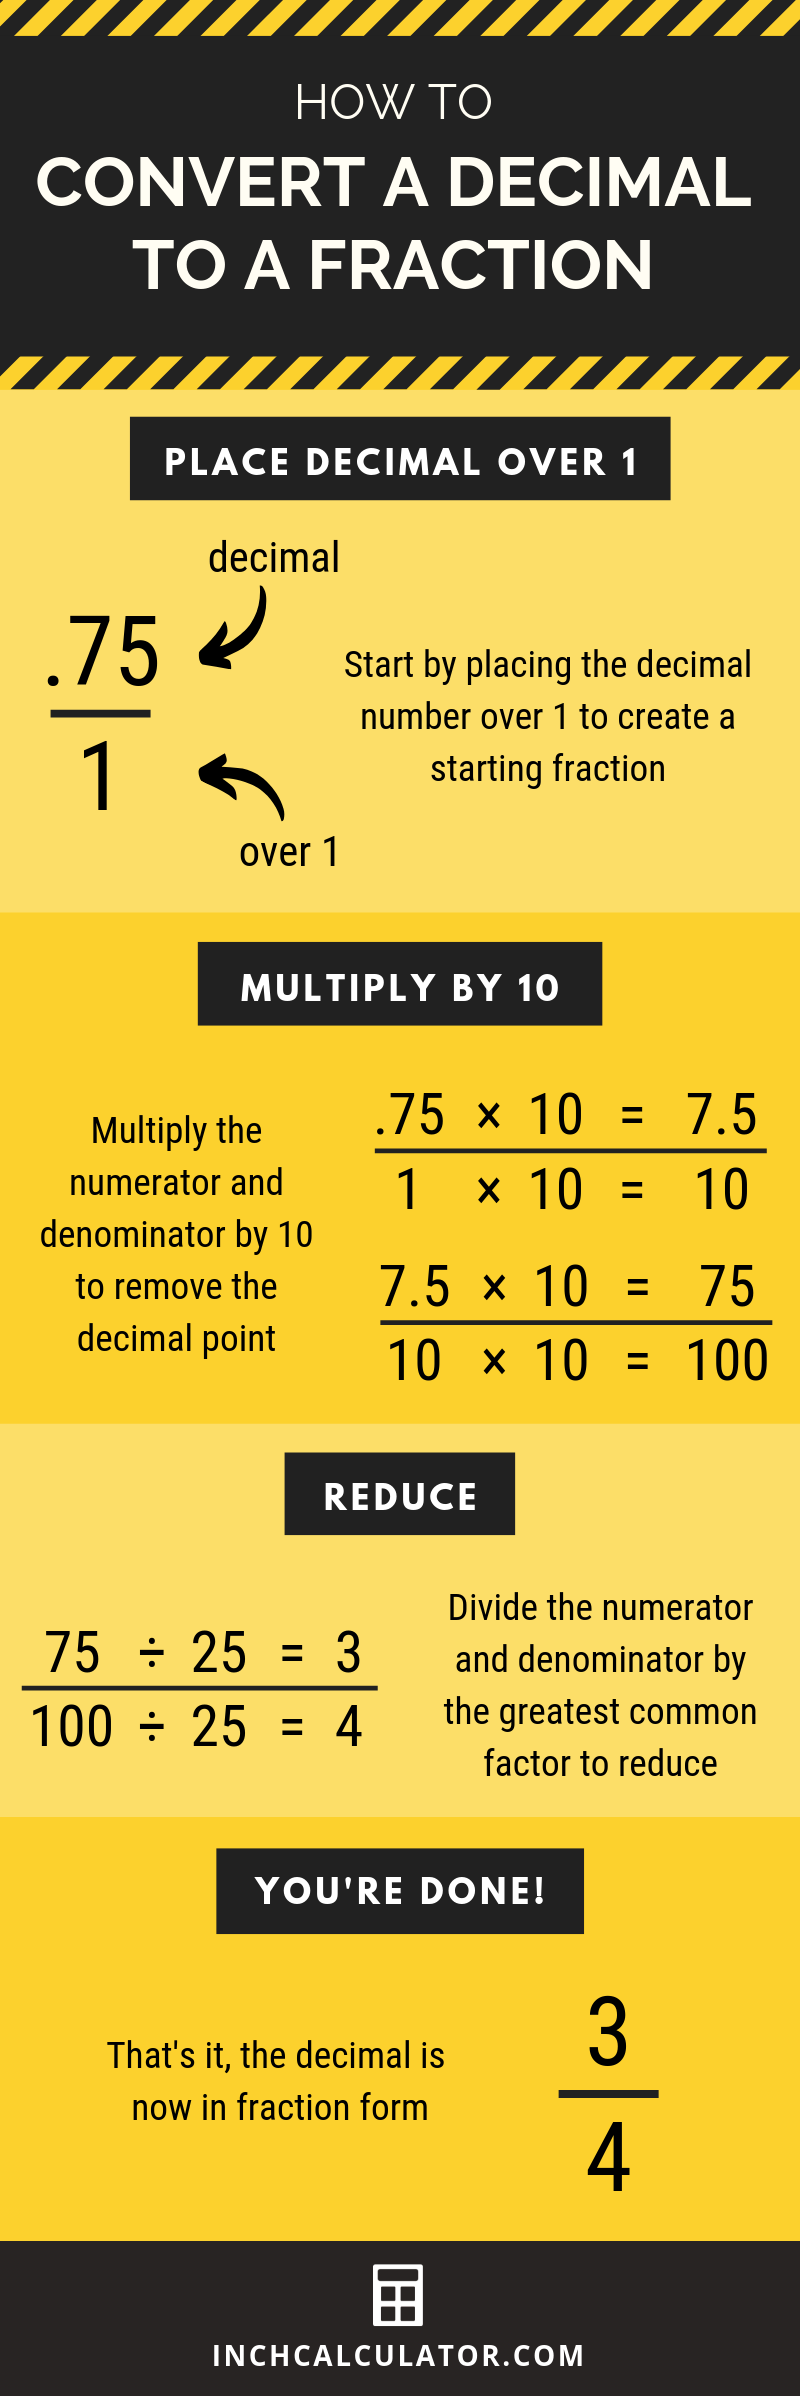 Infographic showing how to convert a decimal to a fraction in three steps